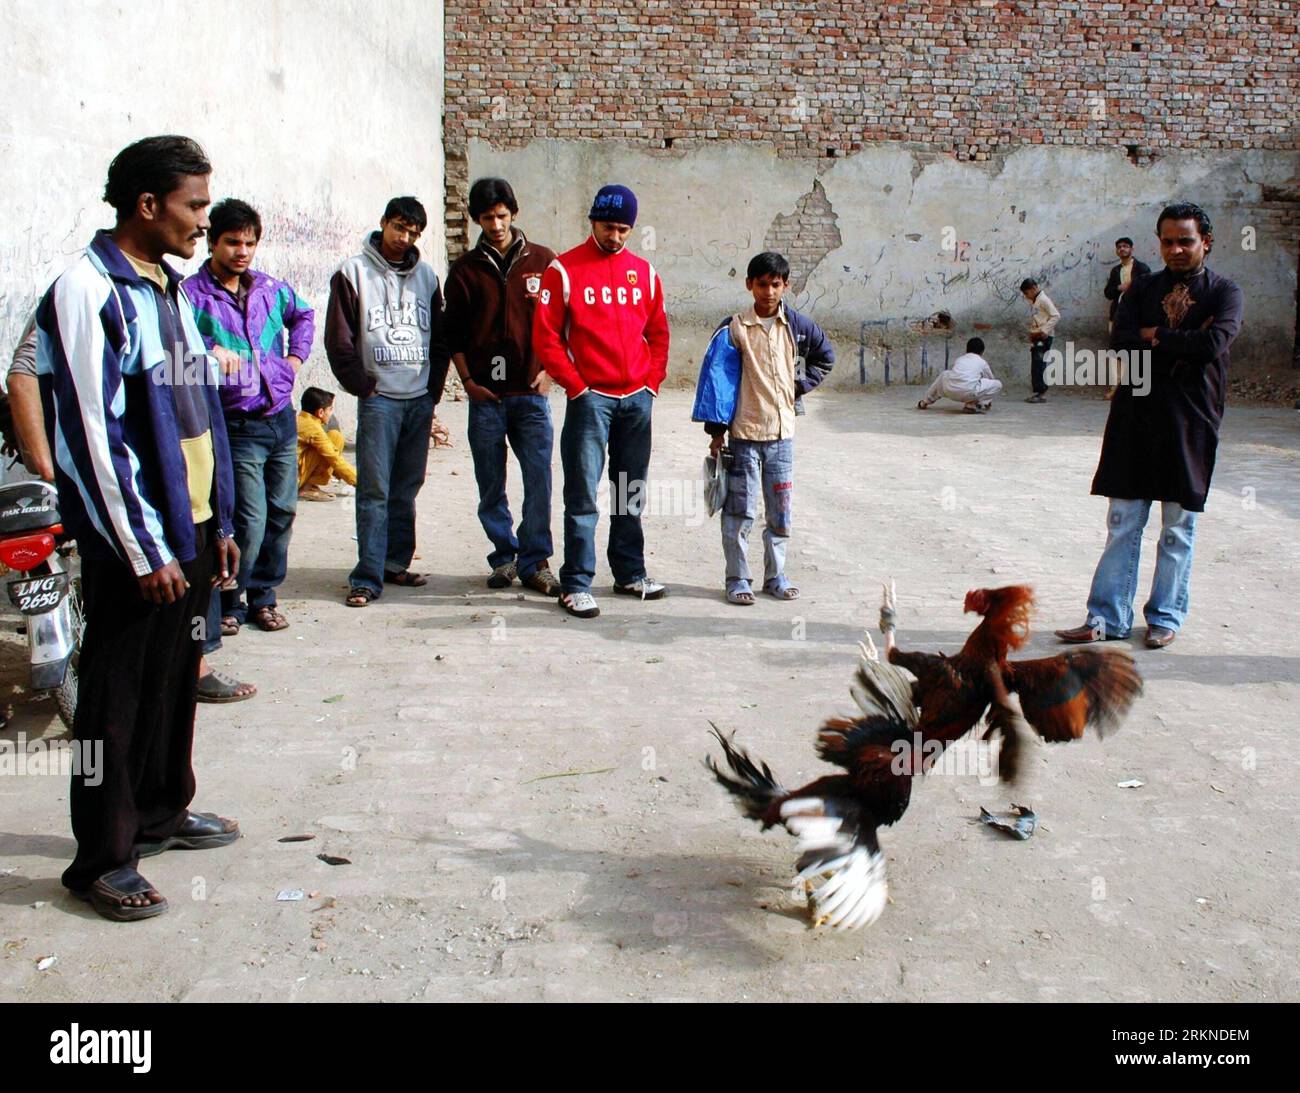 Bildnummer: 57093176  Datum: 20.02.2012  Copyright: imago/Xinhua (120220) -- LAHORE, Feb. 20, 2012 (Xinhua) -- Pakistani men watch a rooster fight in a Christian neighborhood of eastern Pakistan s Lahore on Feb. 20, 2012. Rooster fighting is popular in Pakistan but the fights often take place in quiet residential streets rather than in open grounds as betting is not allowed in public places. (Xinhua/Sajjad) (dzl) PAKISTAN-LAHORE-ROOSTER FIGHT PUBLICATIONxNOTxINxCHN Gesellschaft Tier Hahn Kampf Hahnenkampf xbs x0x 2012 quer      57093176 Date 20 02 2012 Copyright Imago XINHUA  Lahore Feb 20 201 Stock Photo